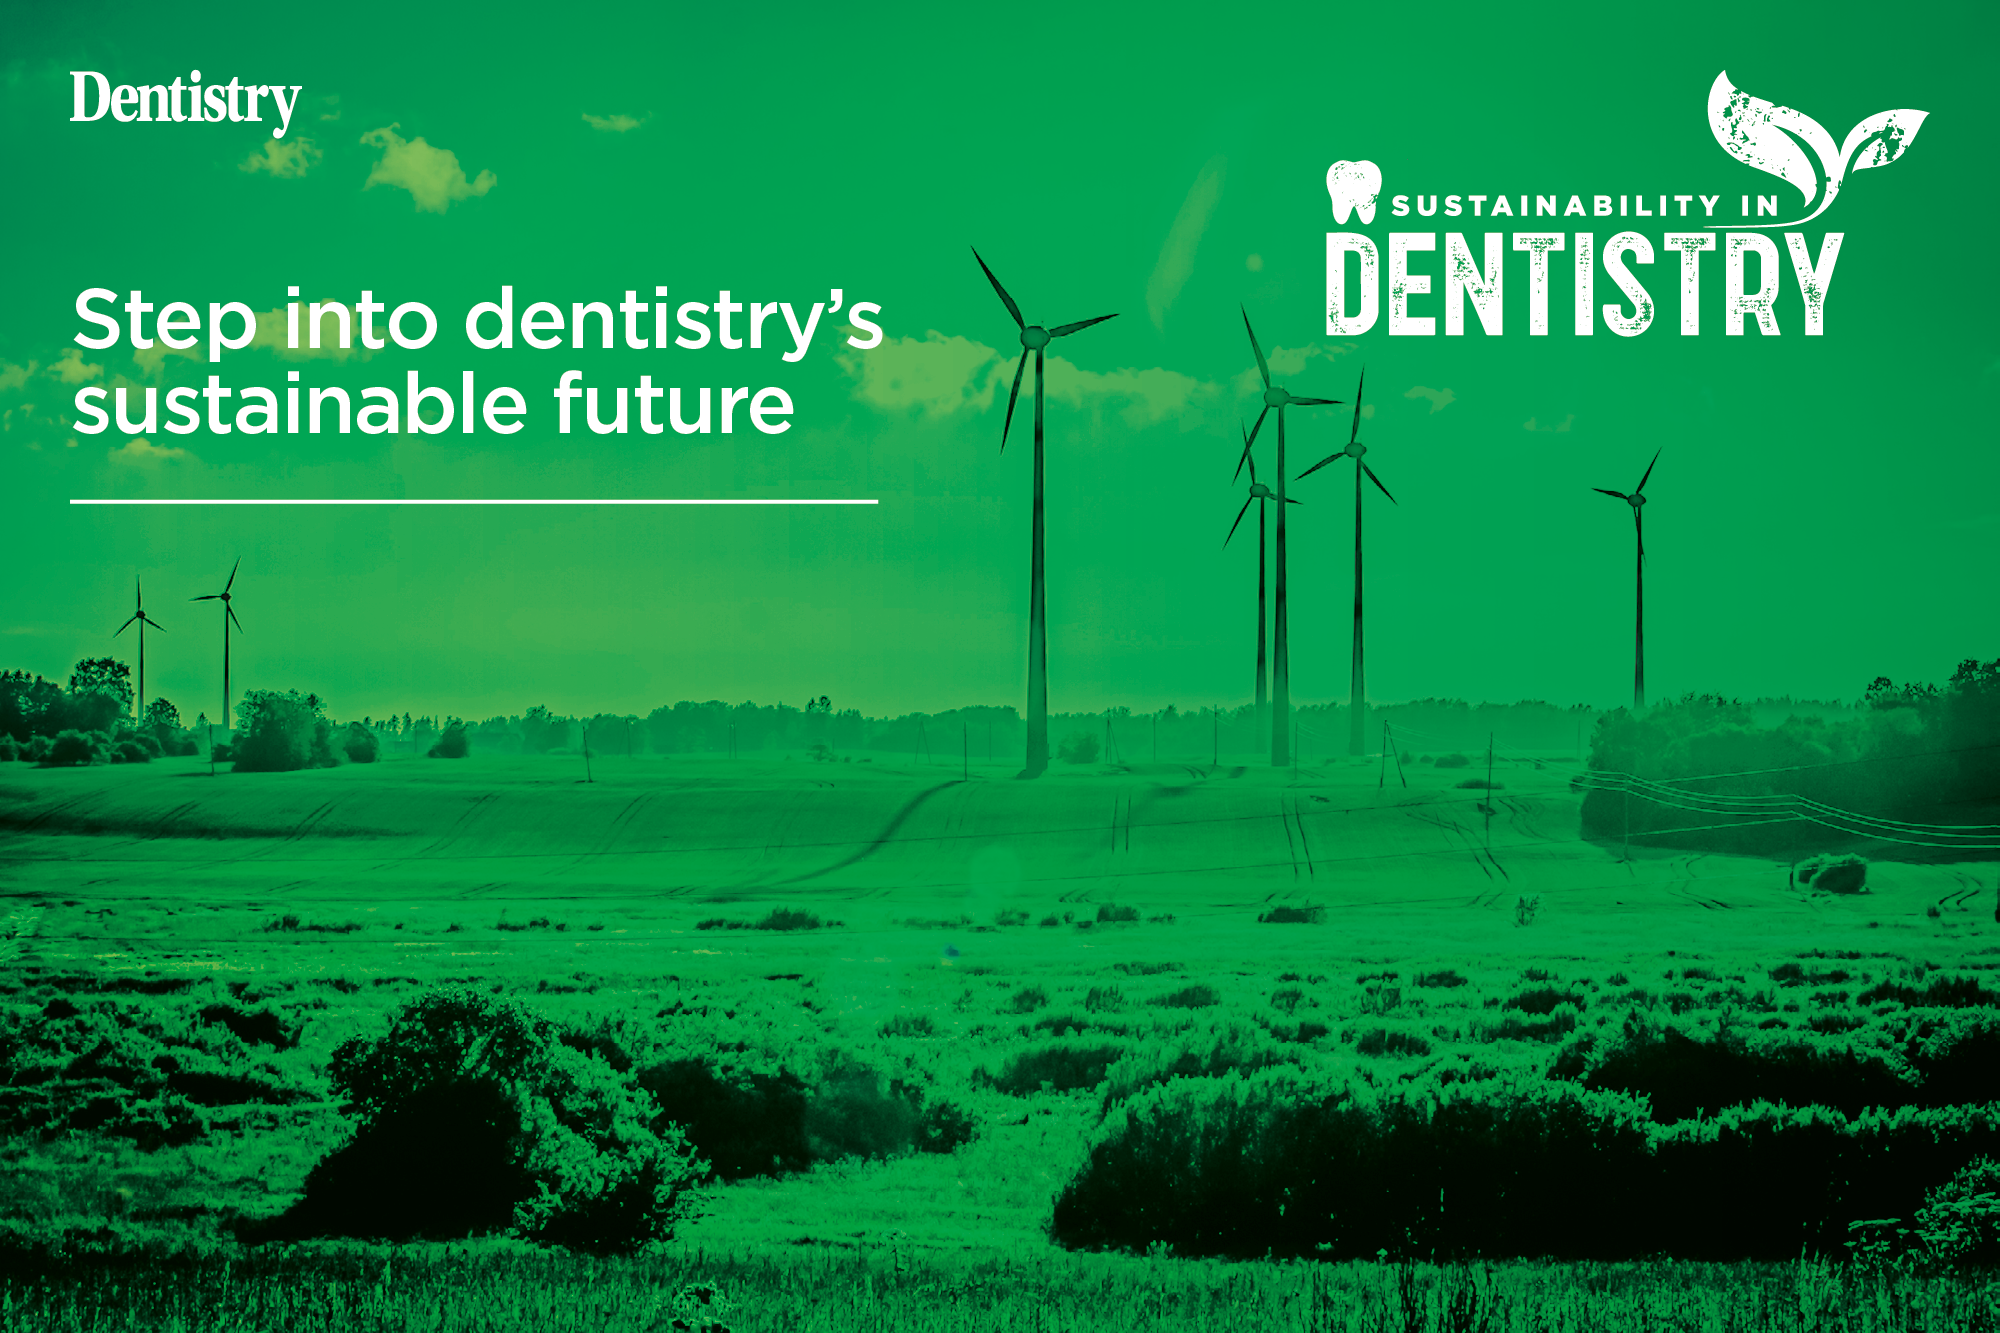 Step into dentistry’s sustainable future